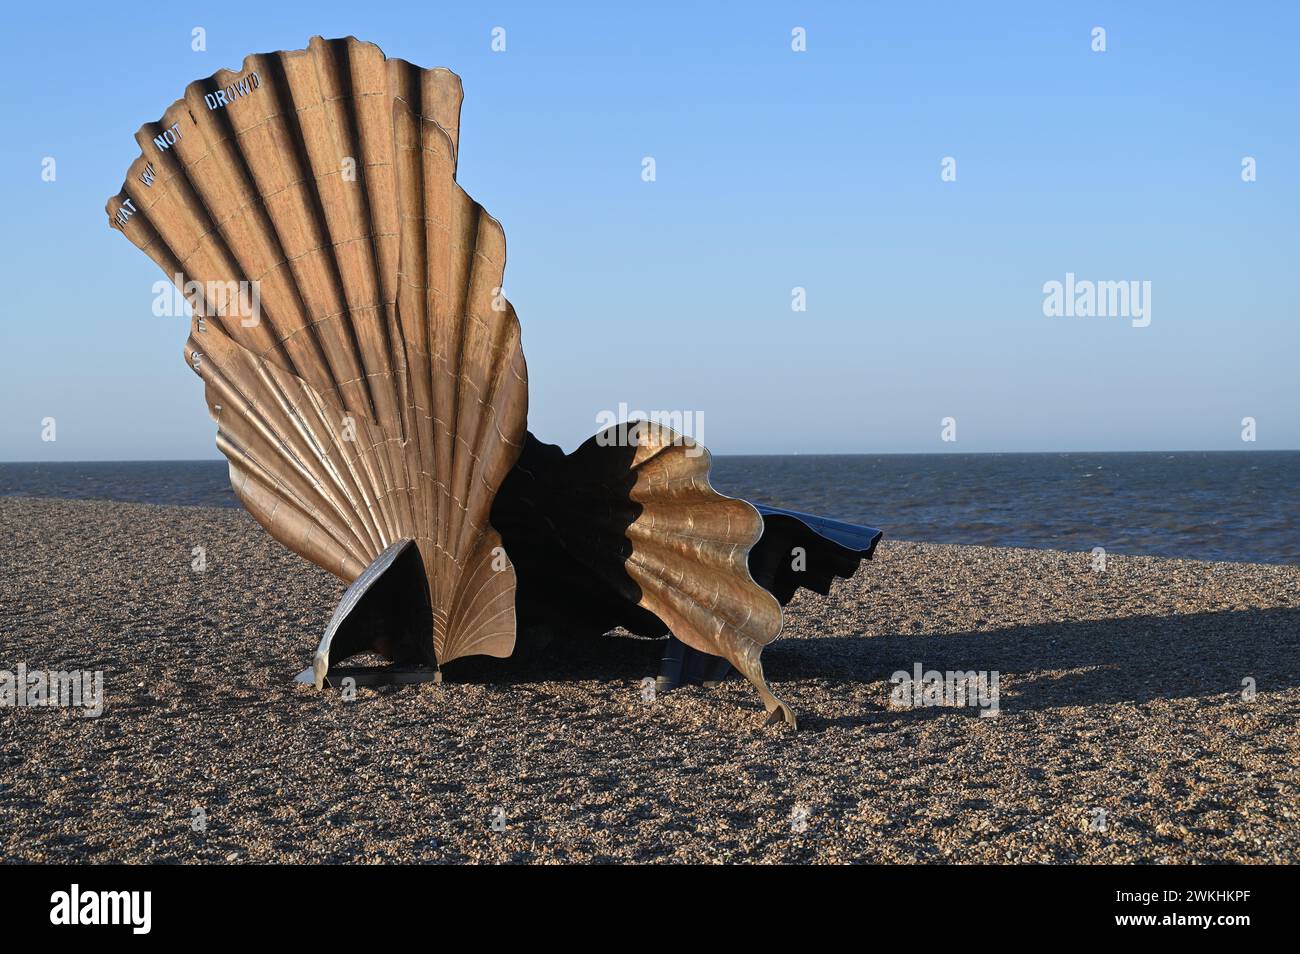 An aged seashell rests gently on the sandy shore, near the tranquil waters Stock Photo